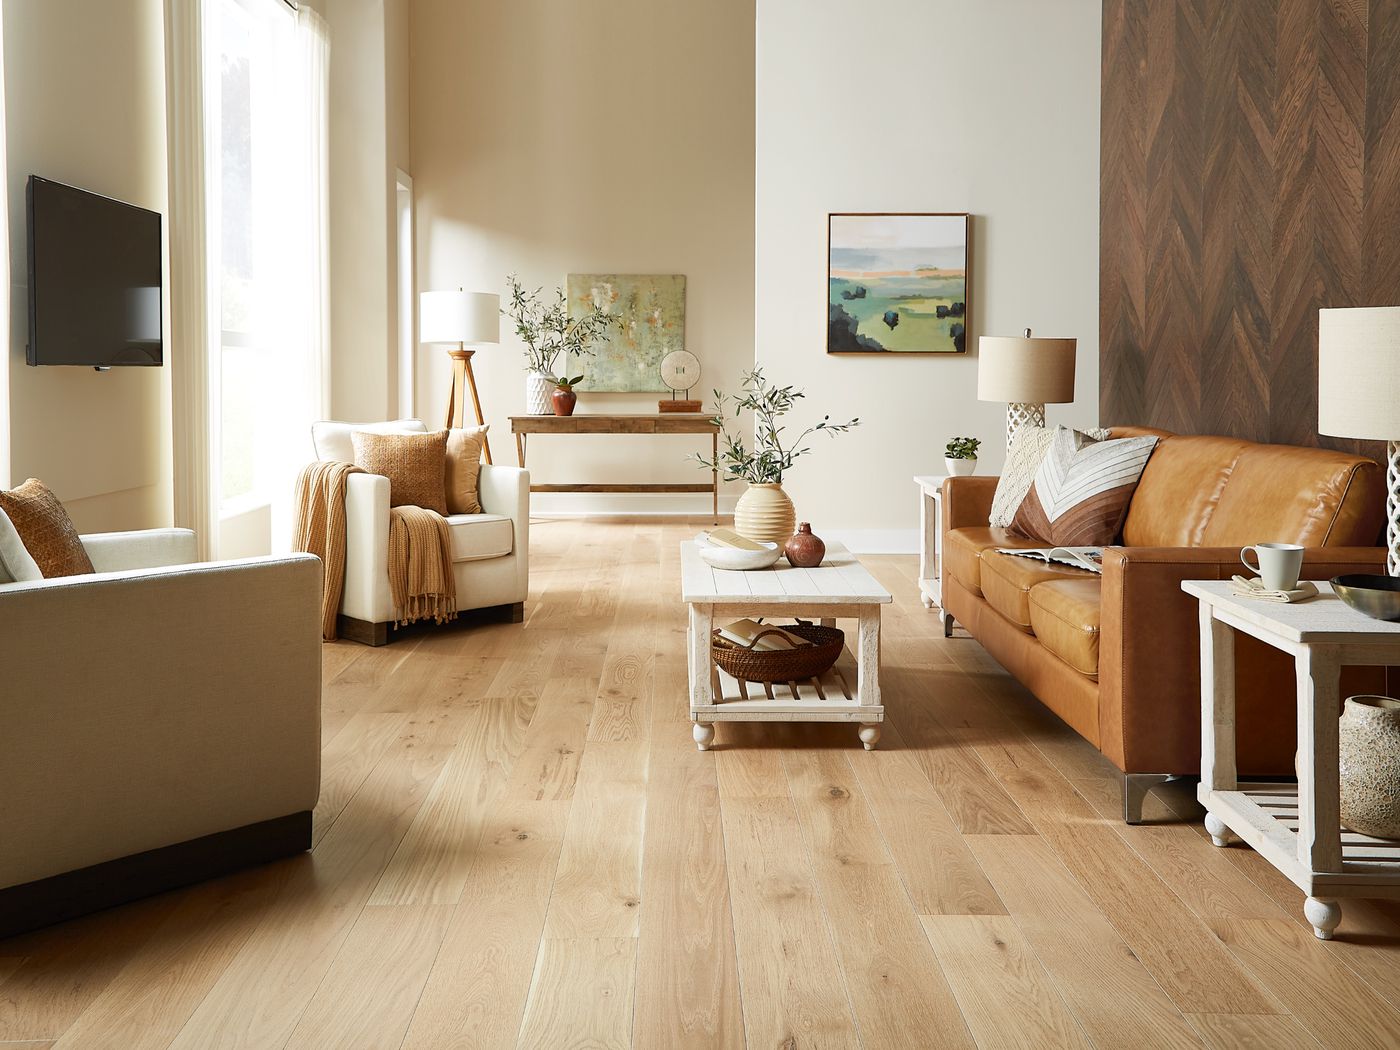 Types Of Flooring Materials And Their Advantages